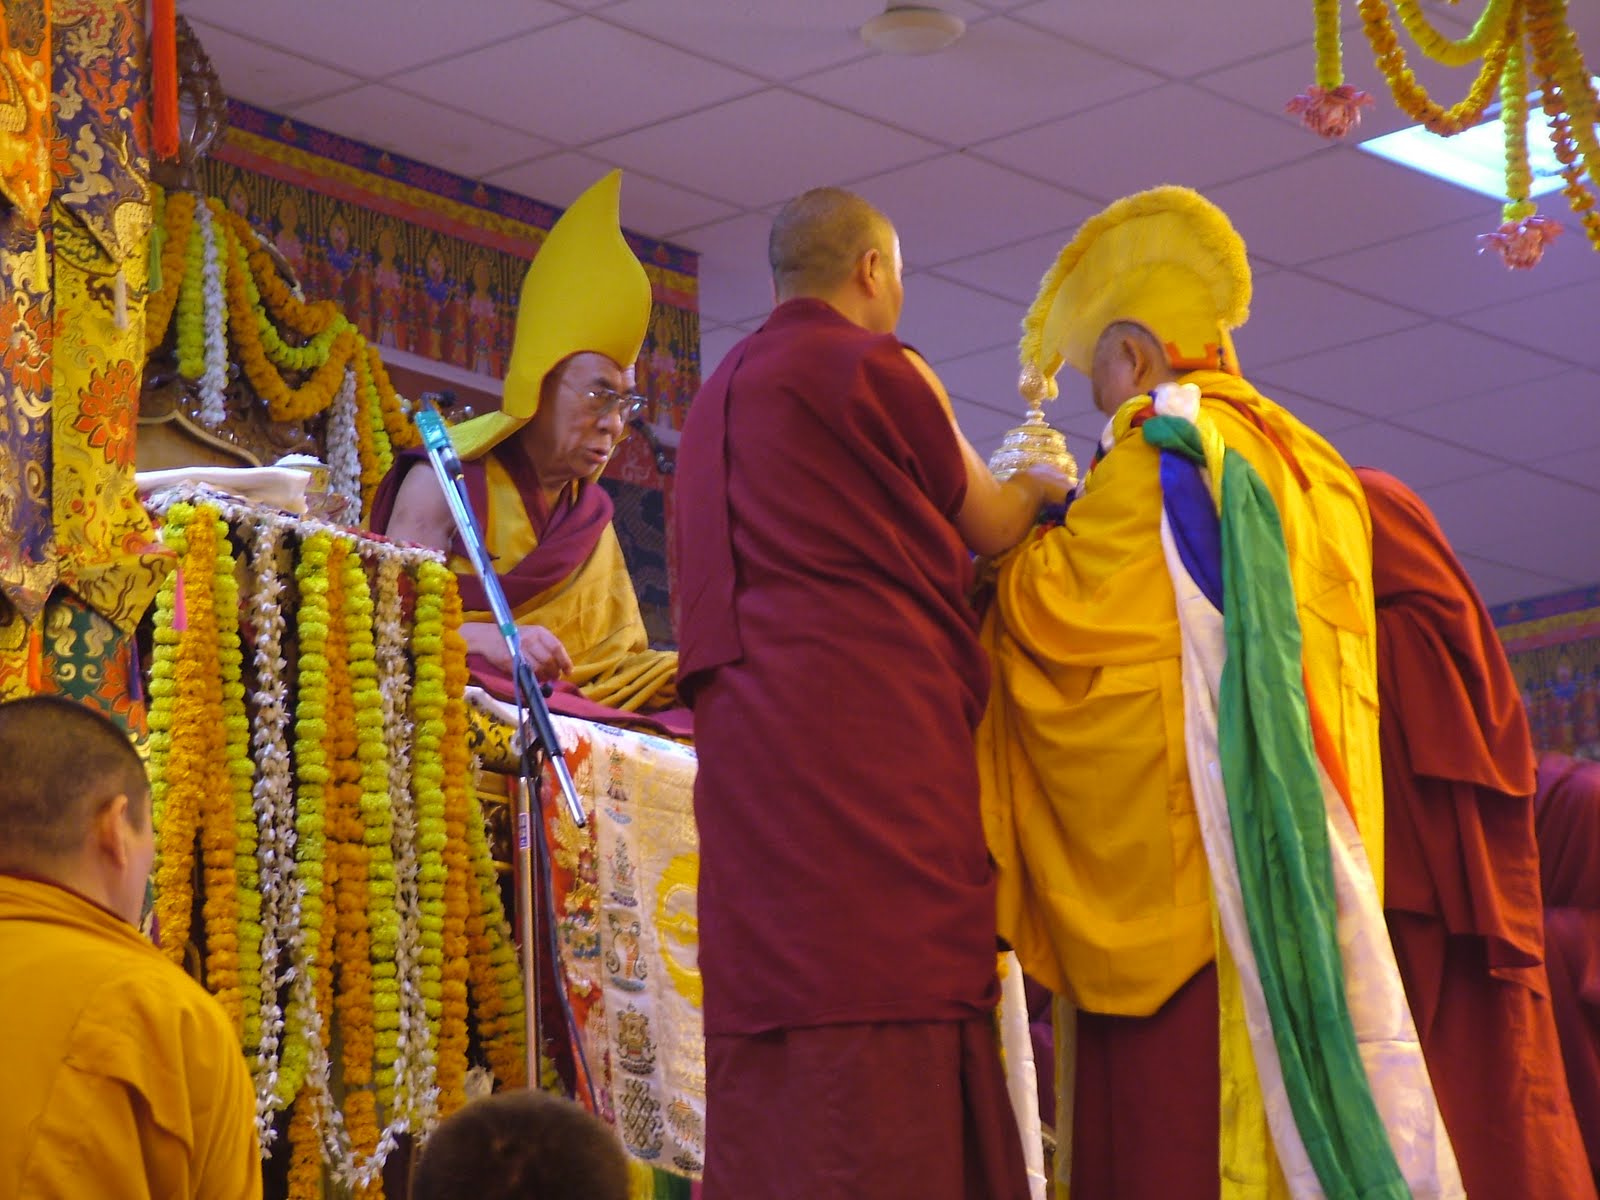 Lama Zopa Rinpoche offering during long life puja offered to His Holiness the Dalai Lama in Saranath January 2008.